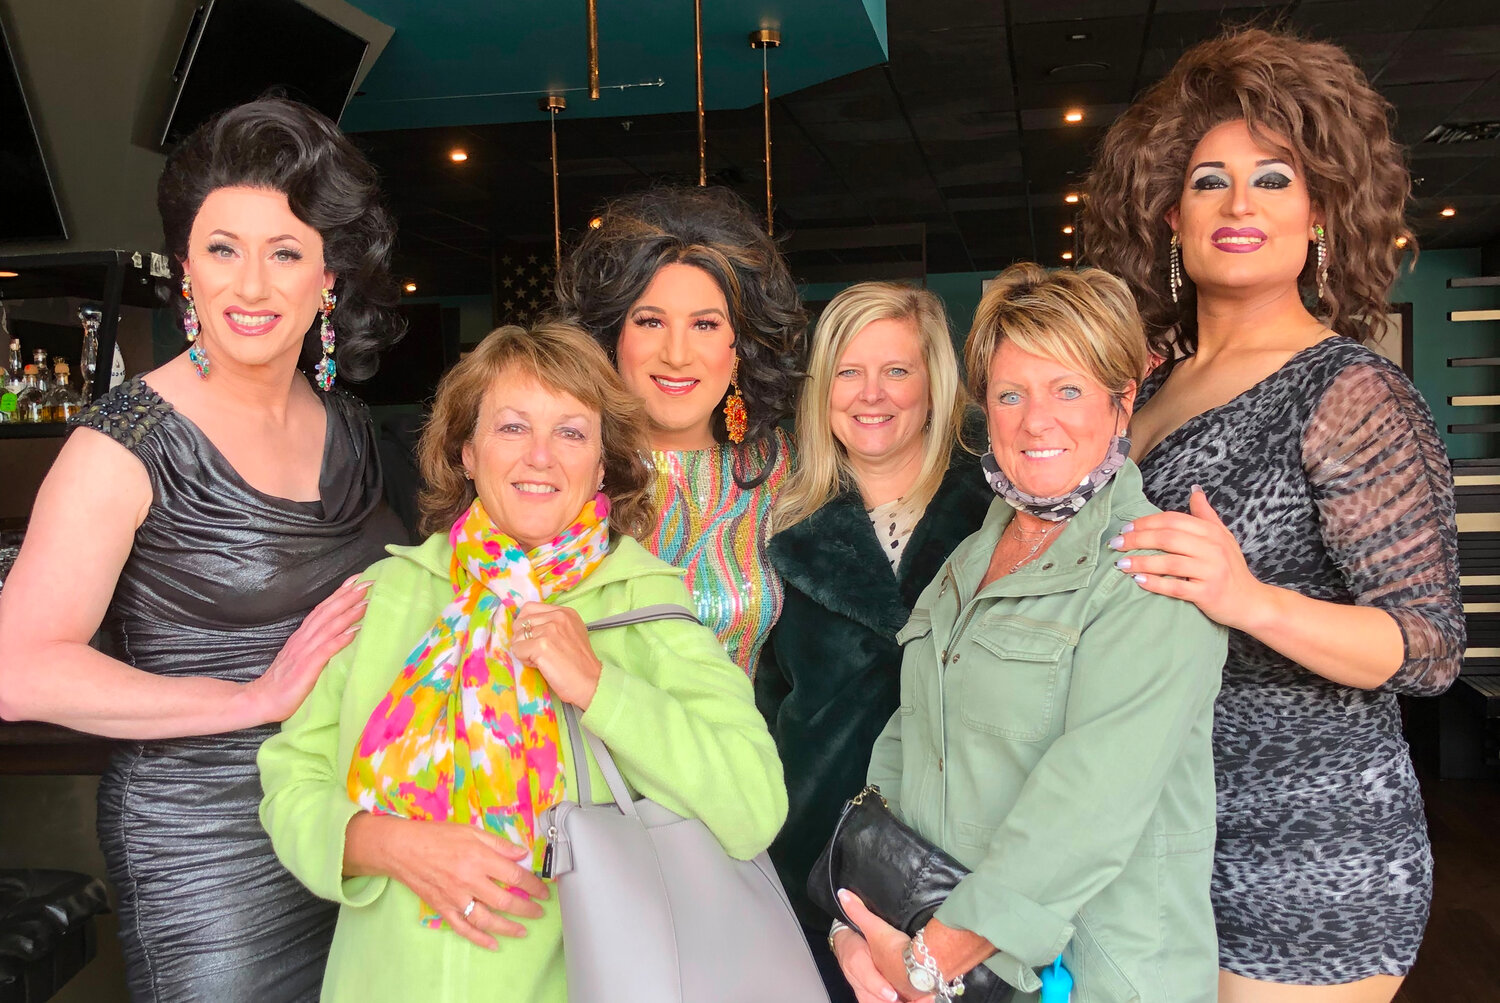 Drag in RI does drag brunches across the state